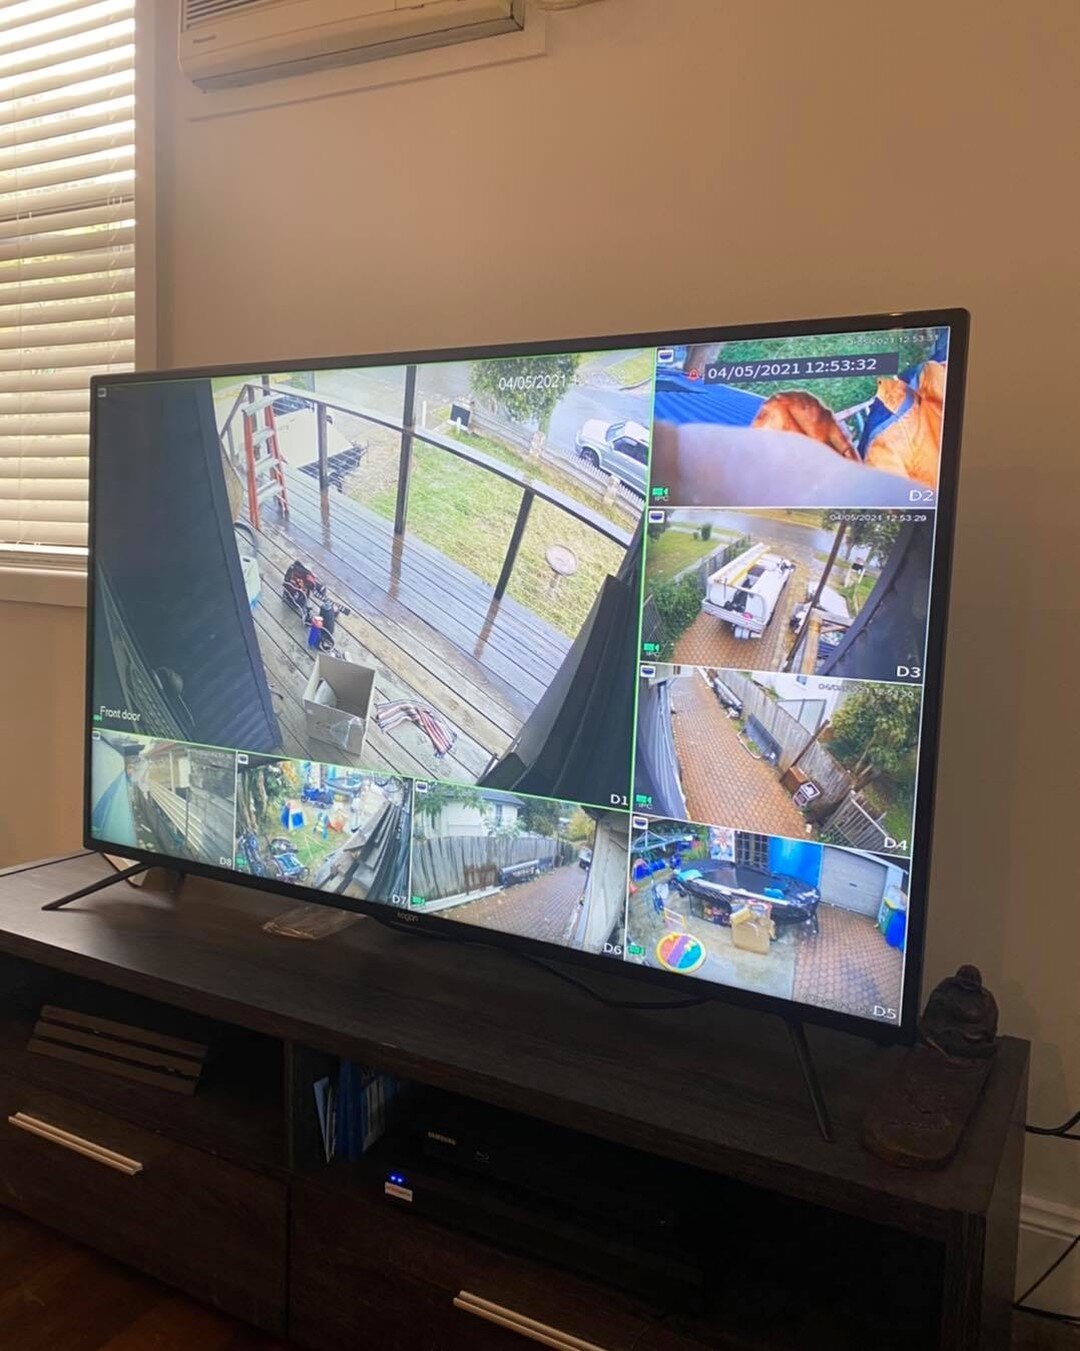 Multech is a licensed security installer. Here is a snapshot of a recently installed complete CCTV system. This system offers AI capabilities that allows for facial and number plate recognition providing peace of mind. This also limits nuisance alarm